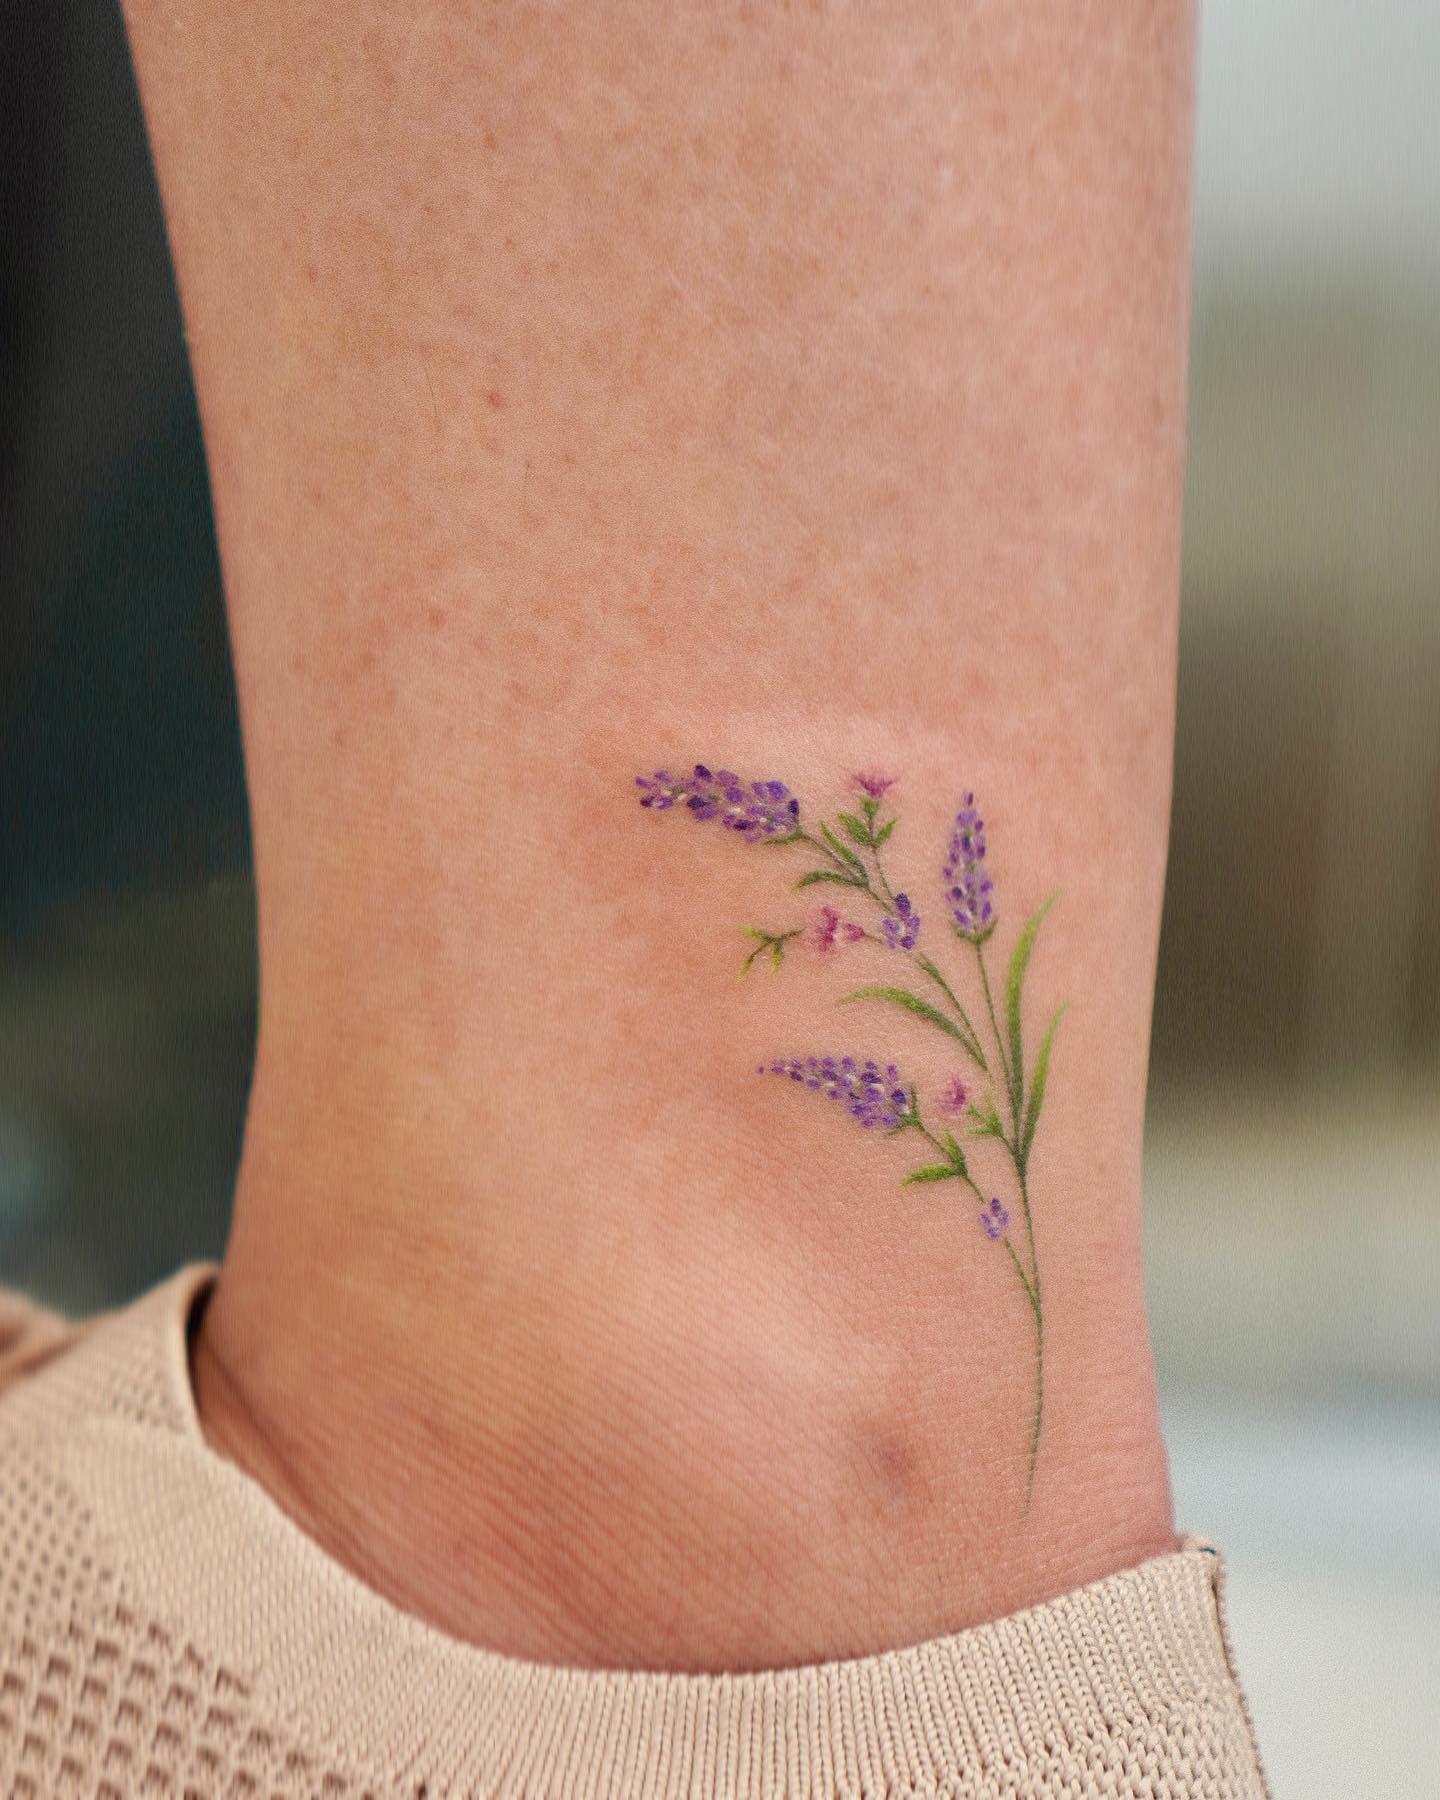 If purple is your favorite color, why not try out this purple flower? It shows and embraces feminism, warmth, and true love. It is a small and sweet tattoo, a must-try by those who like minimalism.